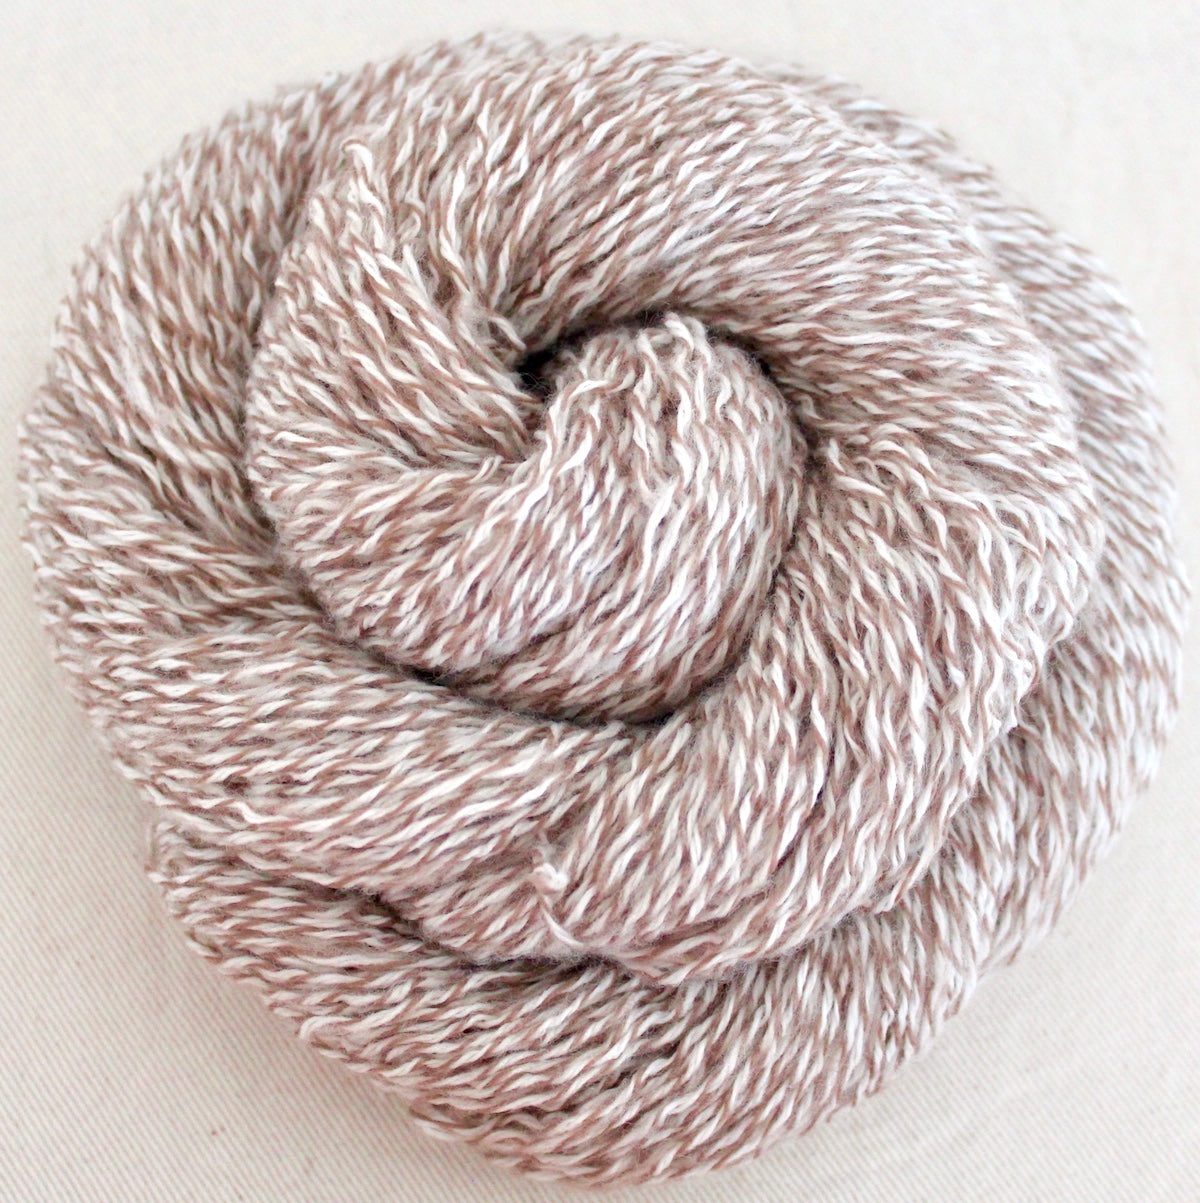 A skein of Vegan, Variegated Tan and White, 100% Acrylic, Sport weight Yarn recycled by hand from unwanted sweaters swirled attractively in the center of the frame. 